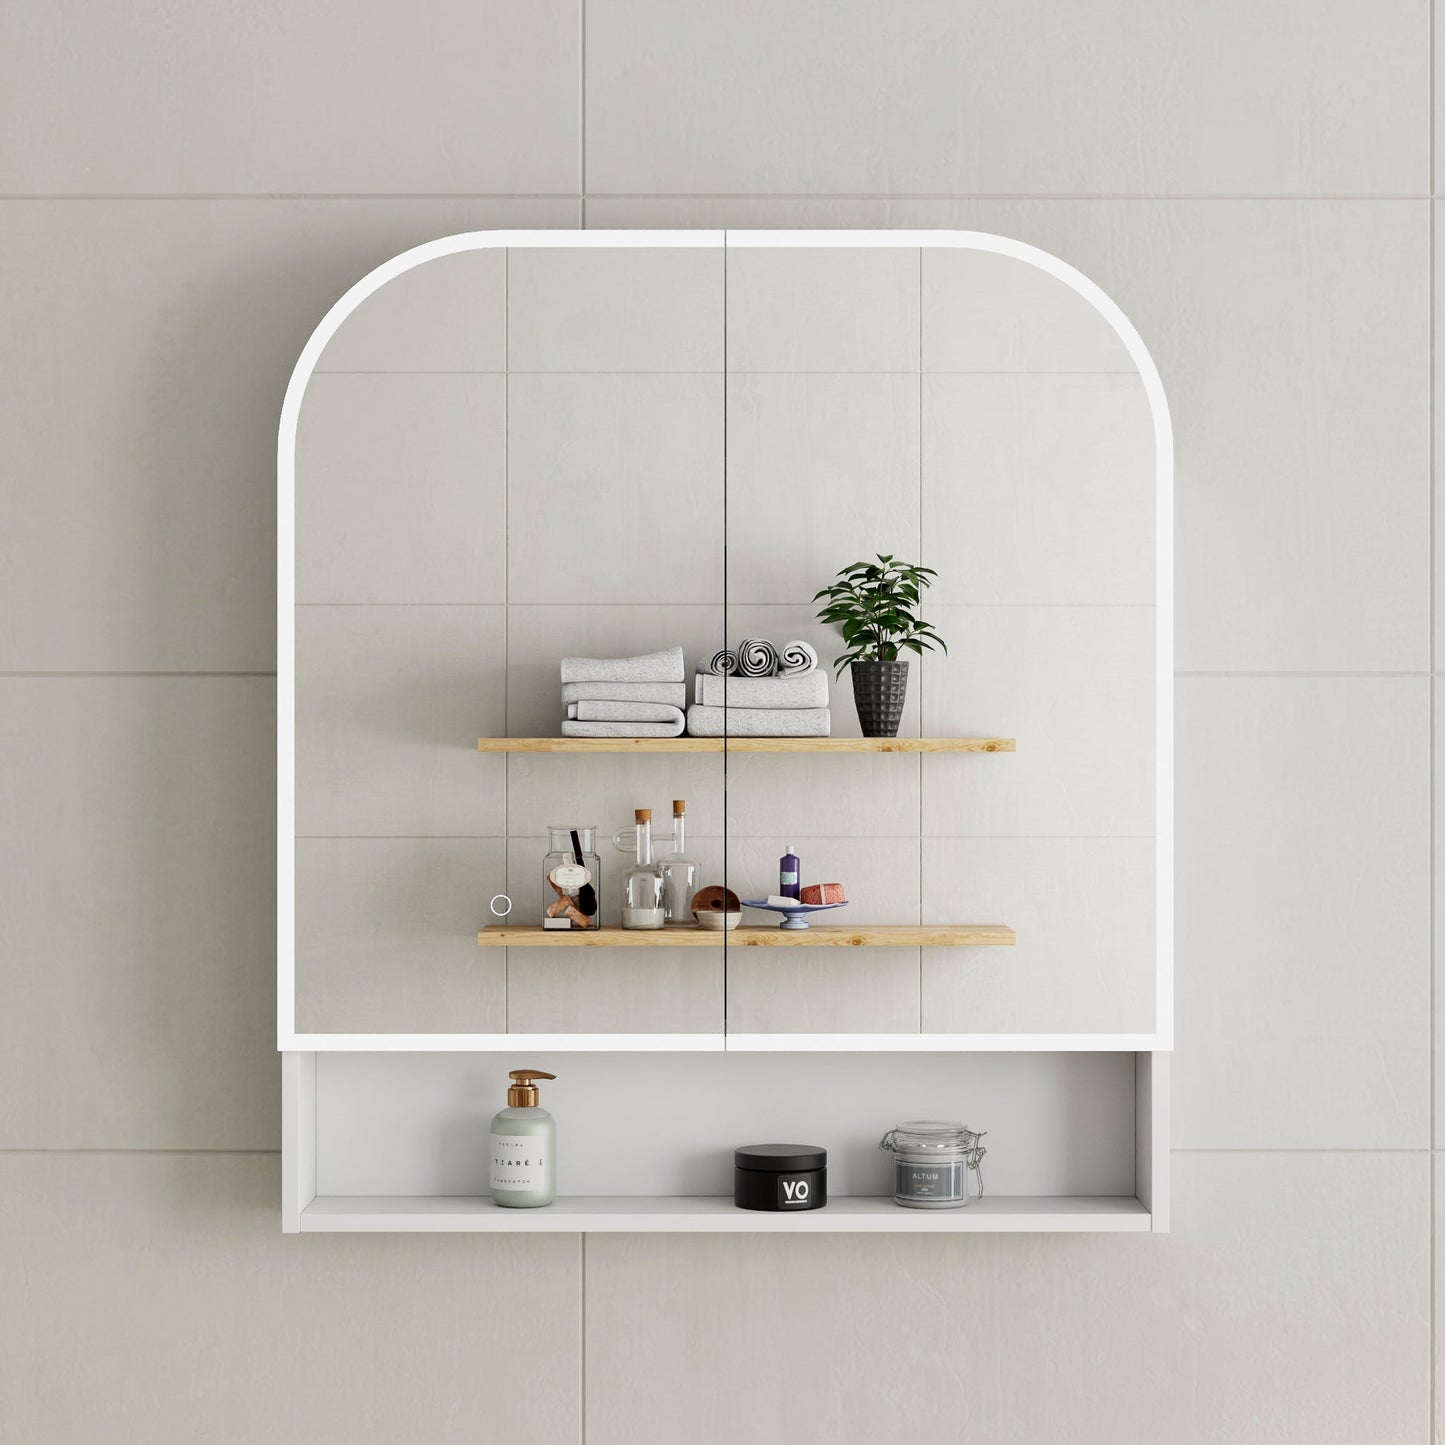 Tura Arch 800mm x 900mm Fronlit LED Shaving Cabinet Mirror with Exposed Shelf, Matte White